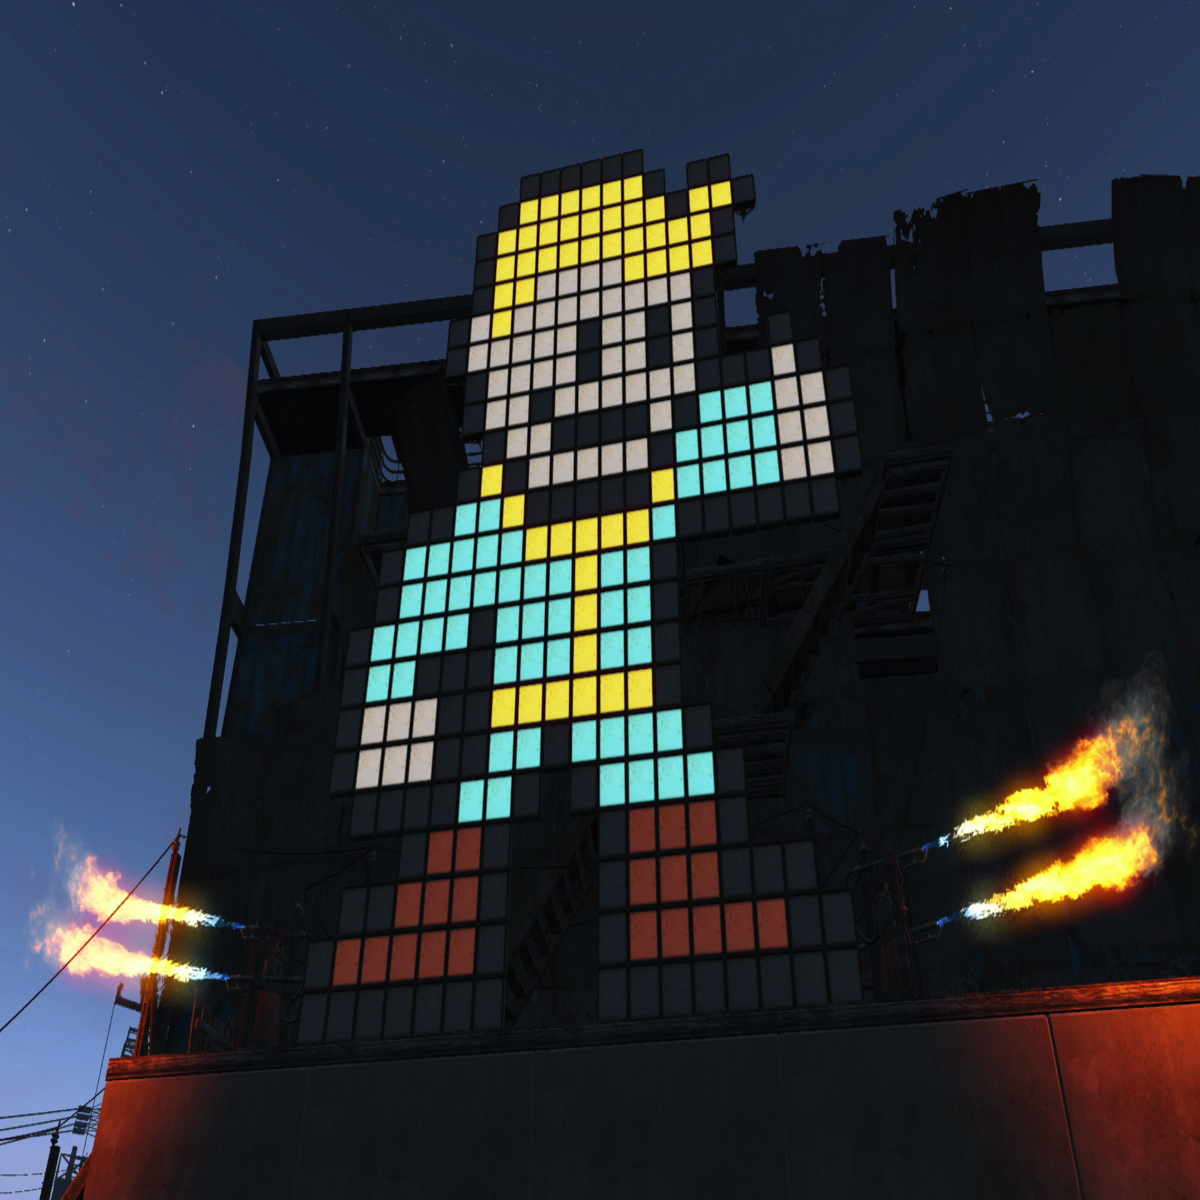 10 Mind-Blowing Mods That Turn Fallout 3 Into Fallout 4